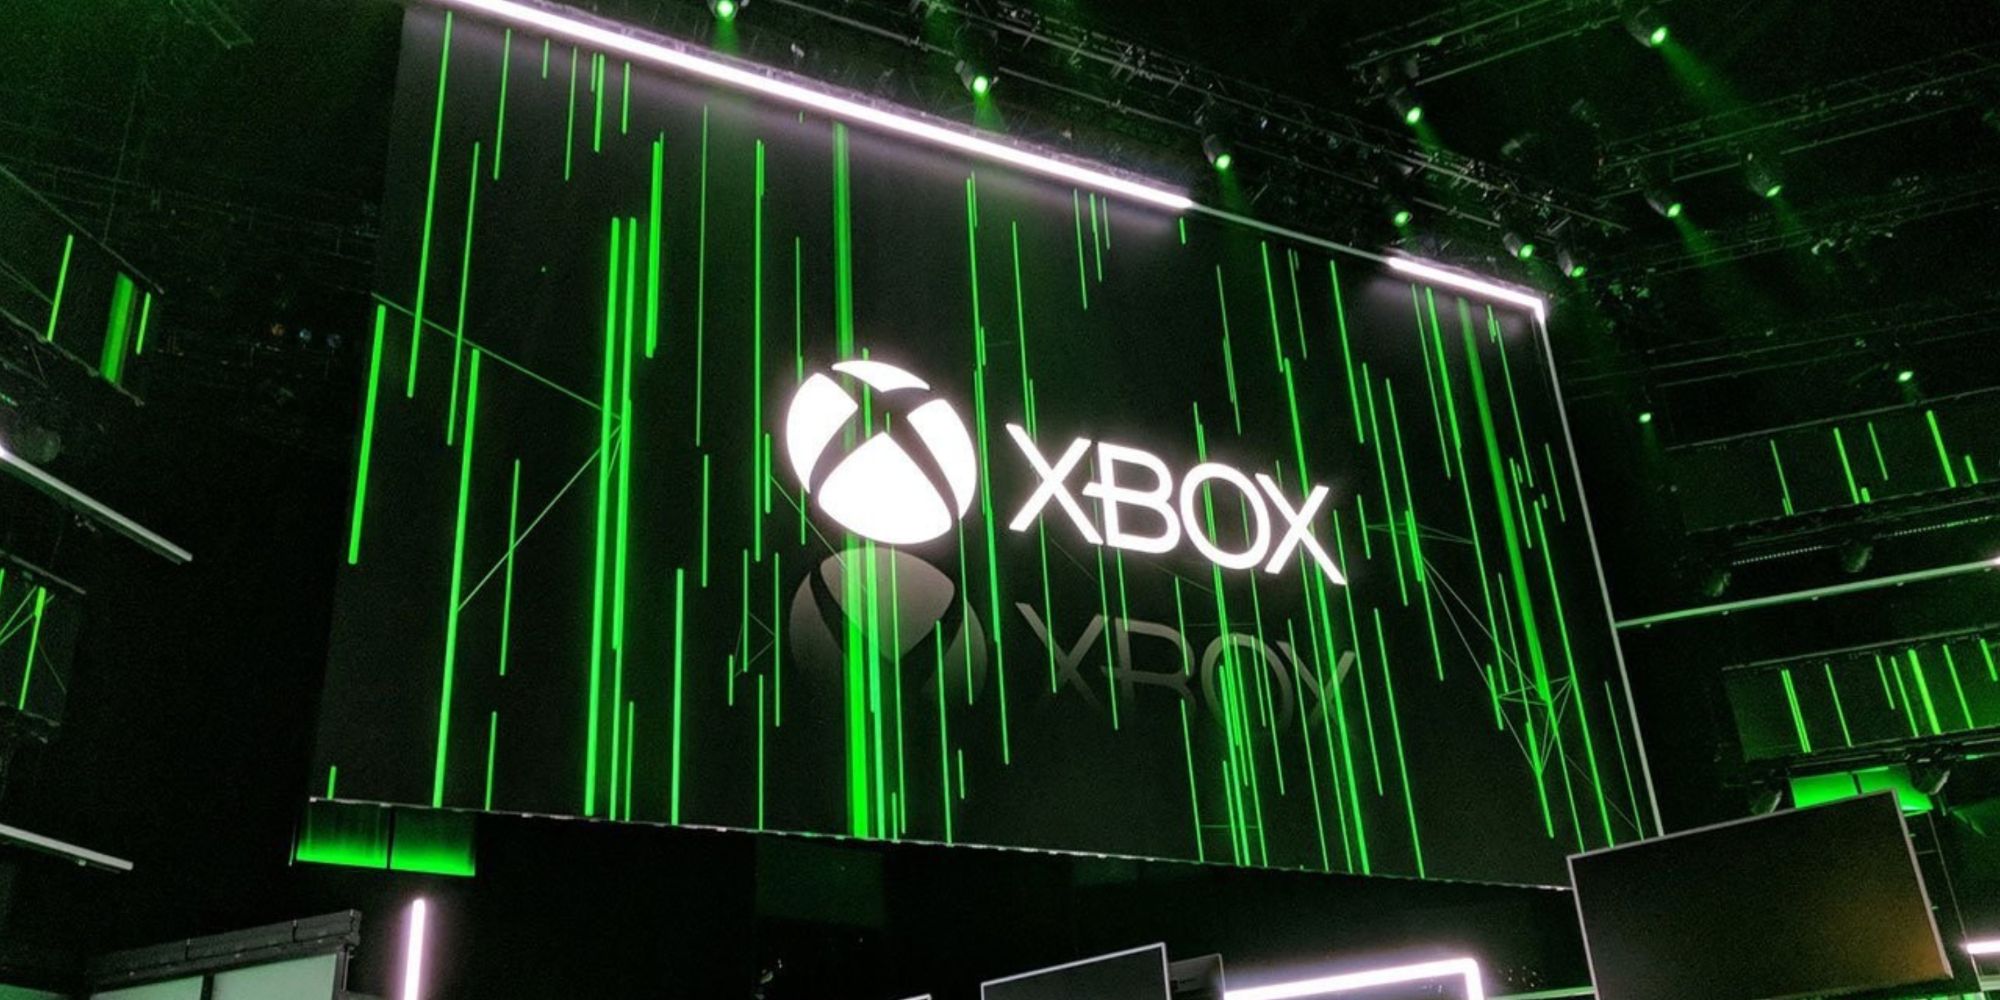 xbox big screen behind a stage